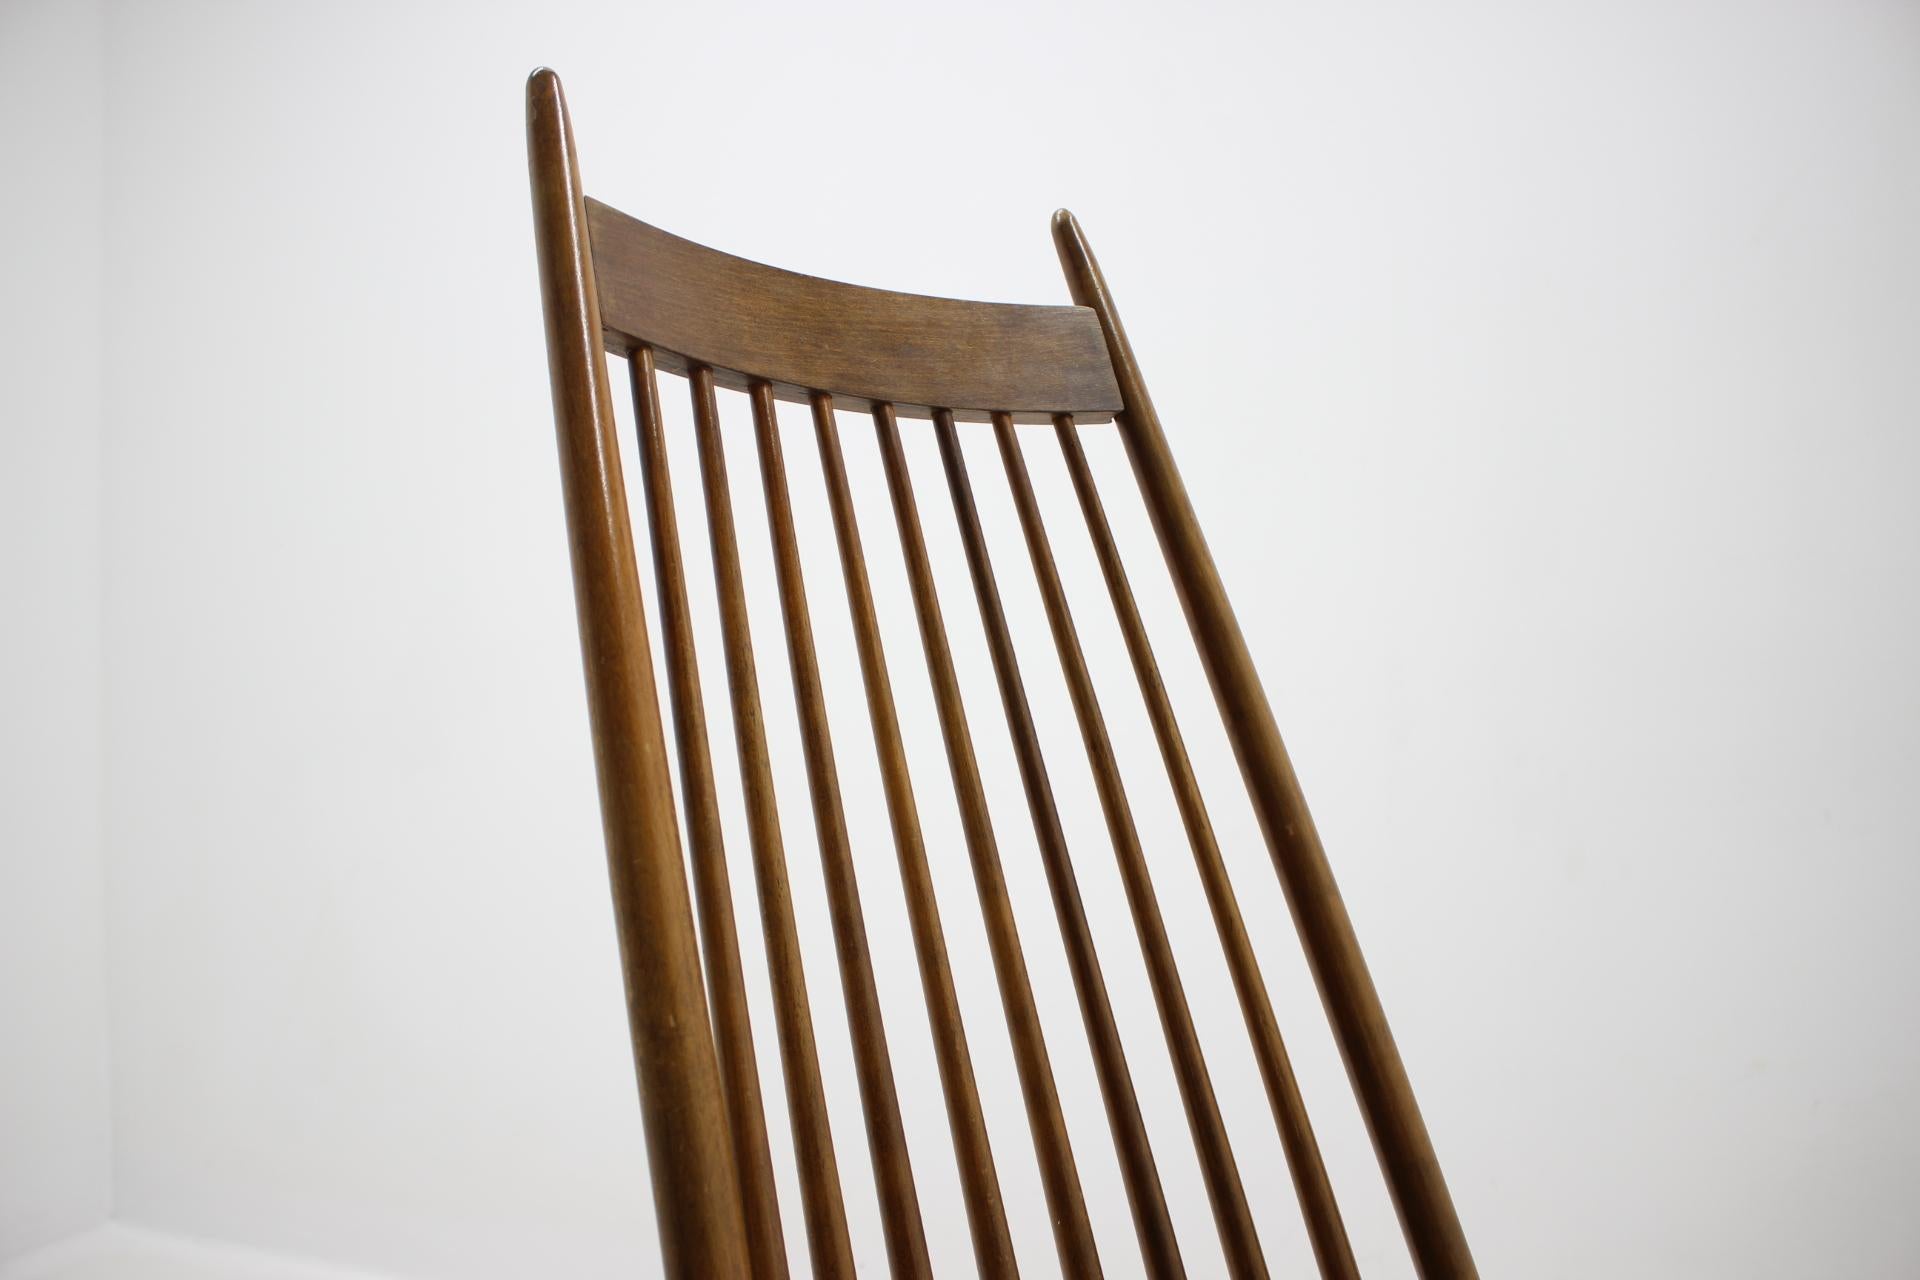 Polished Midcentury Wooden Scandinavian Style Rocking Chair, Czechoslovakia, 1960s For Sale